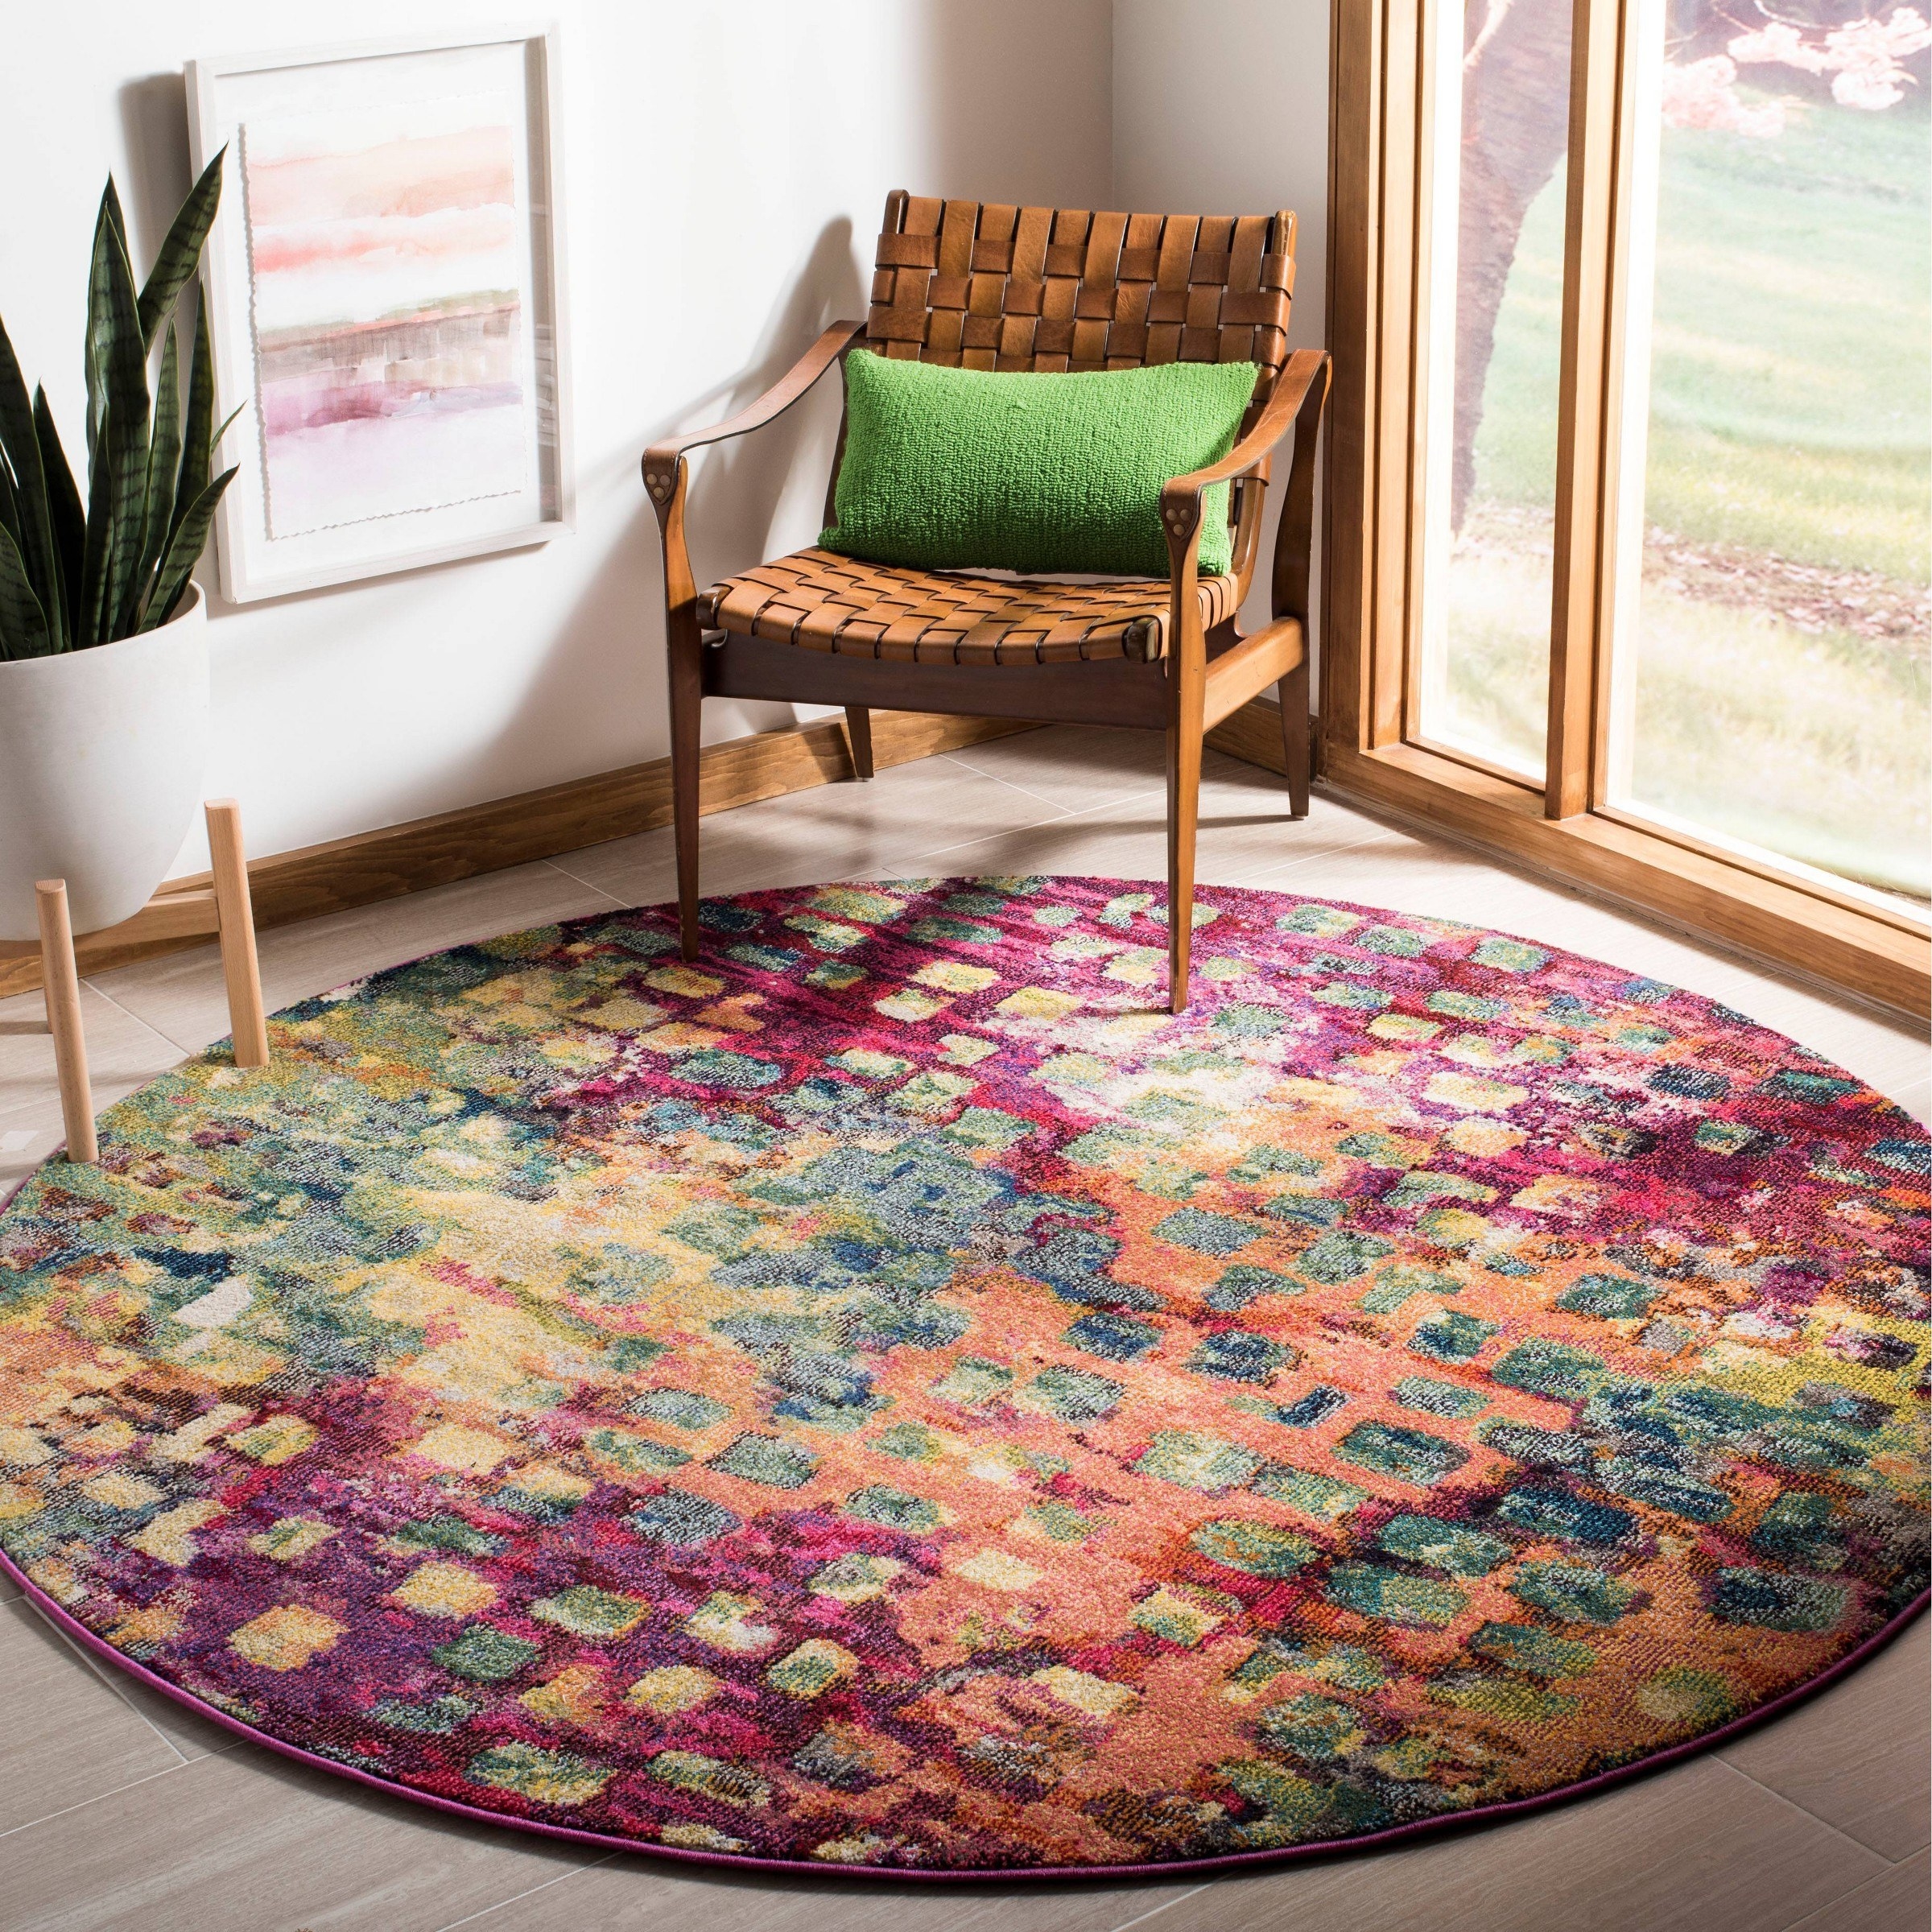 the round rug version in pink multi color